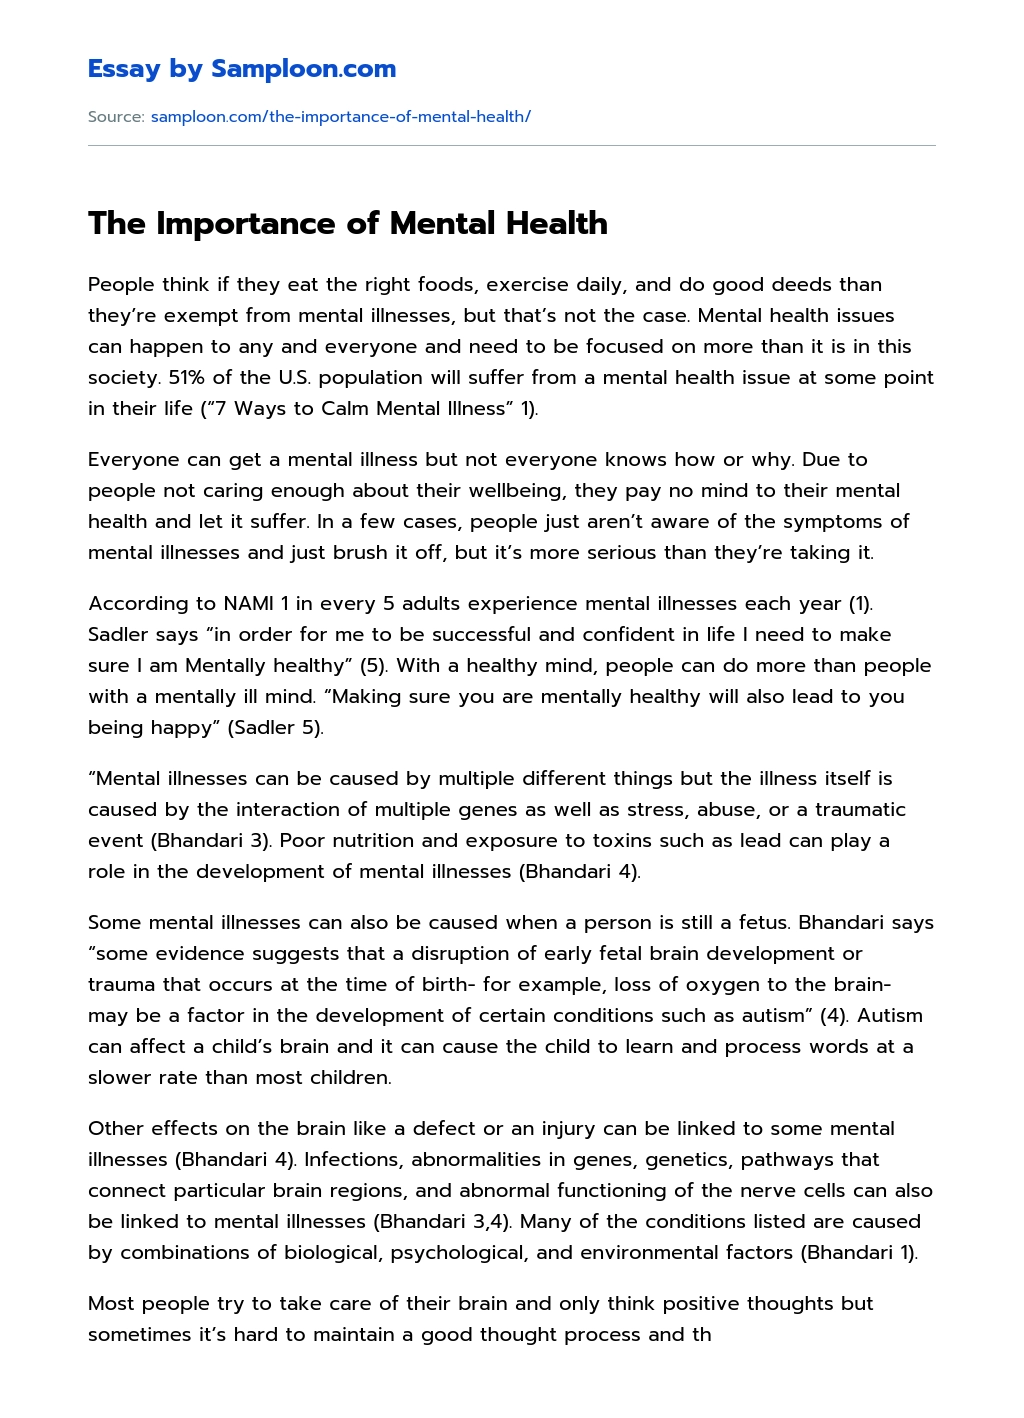 The Importance of Mental Health essay